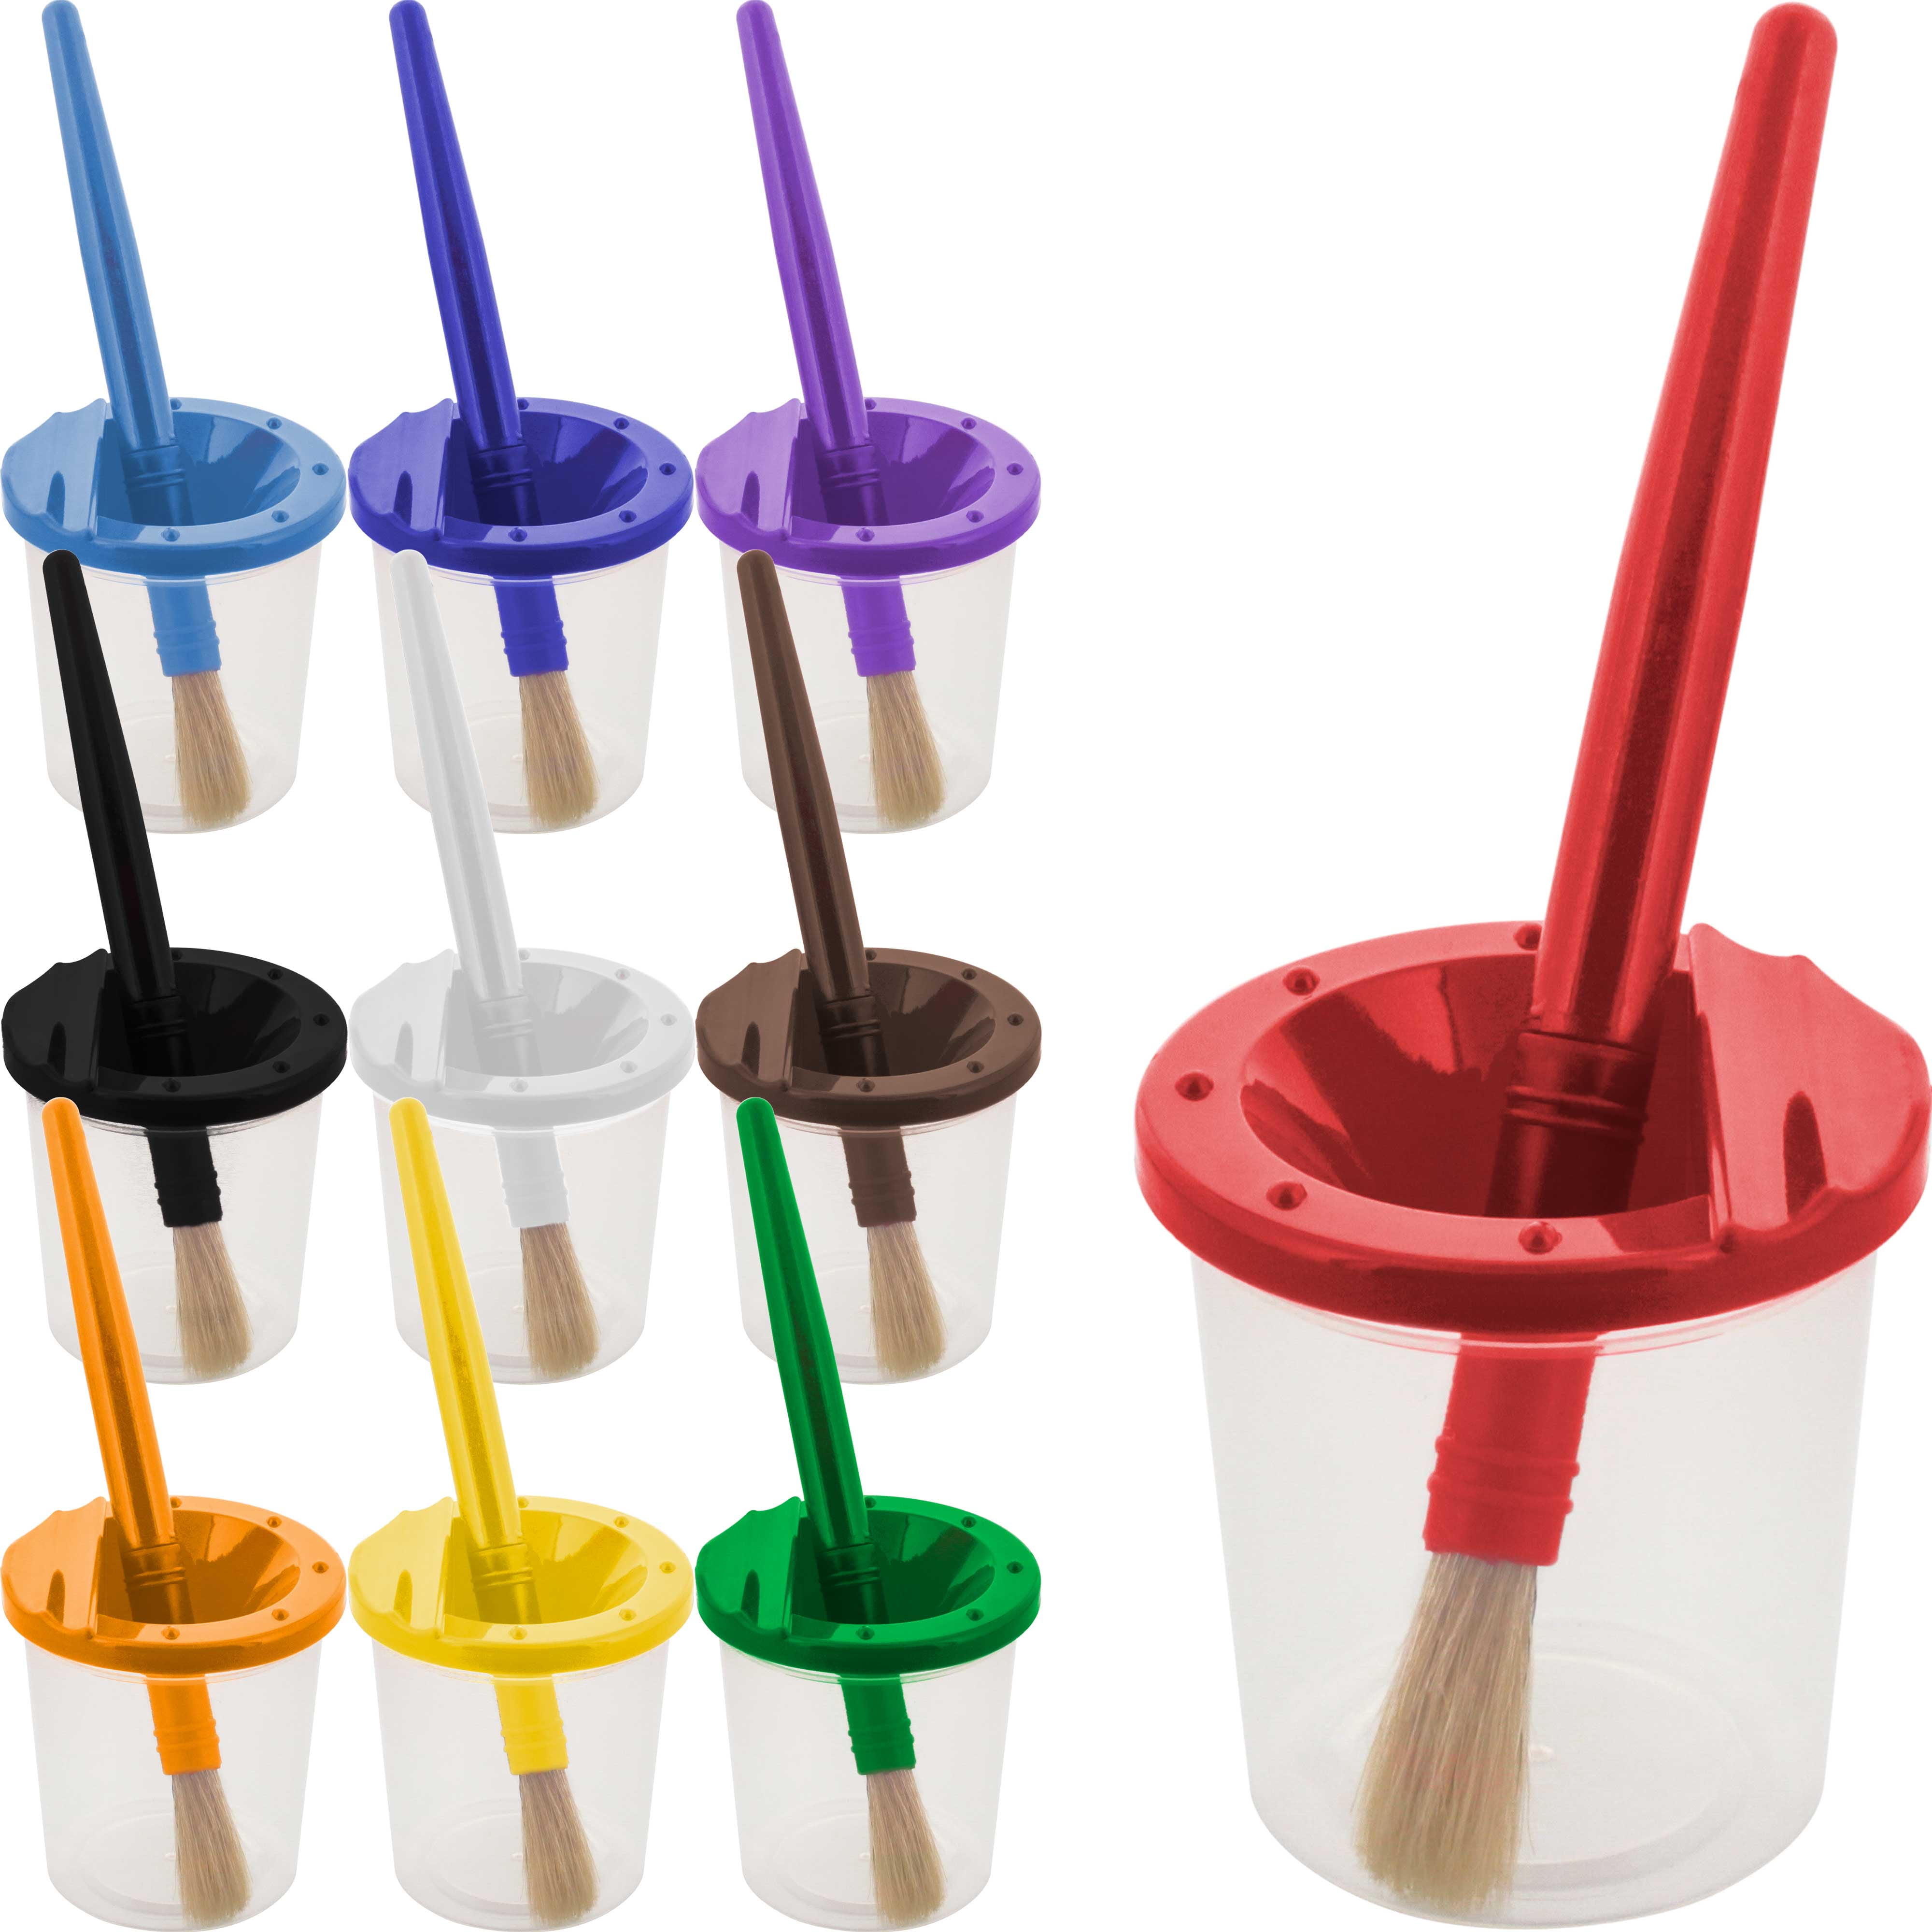 12 Pack No Spill Paint Cups with Lids for Kids, Art and Crafts Supplies for Classroom, 4 Colors, 3 x 3 in